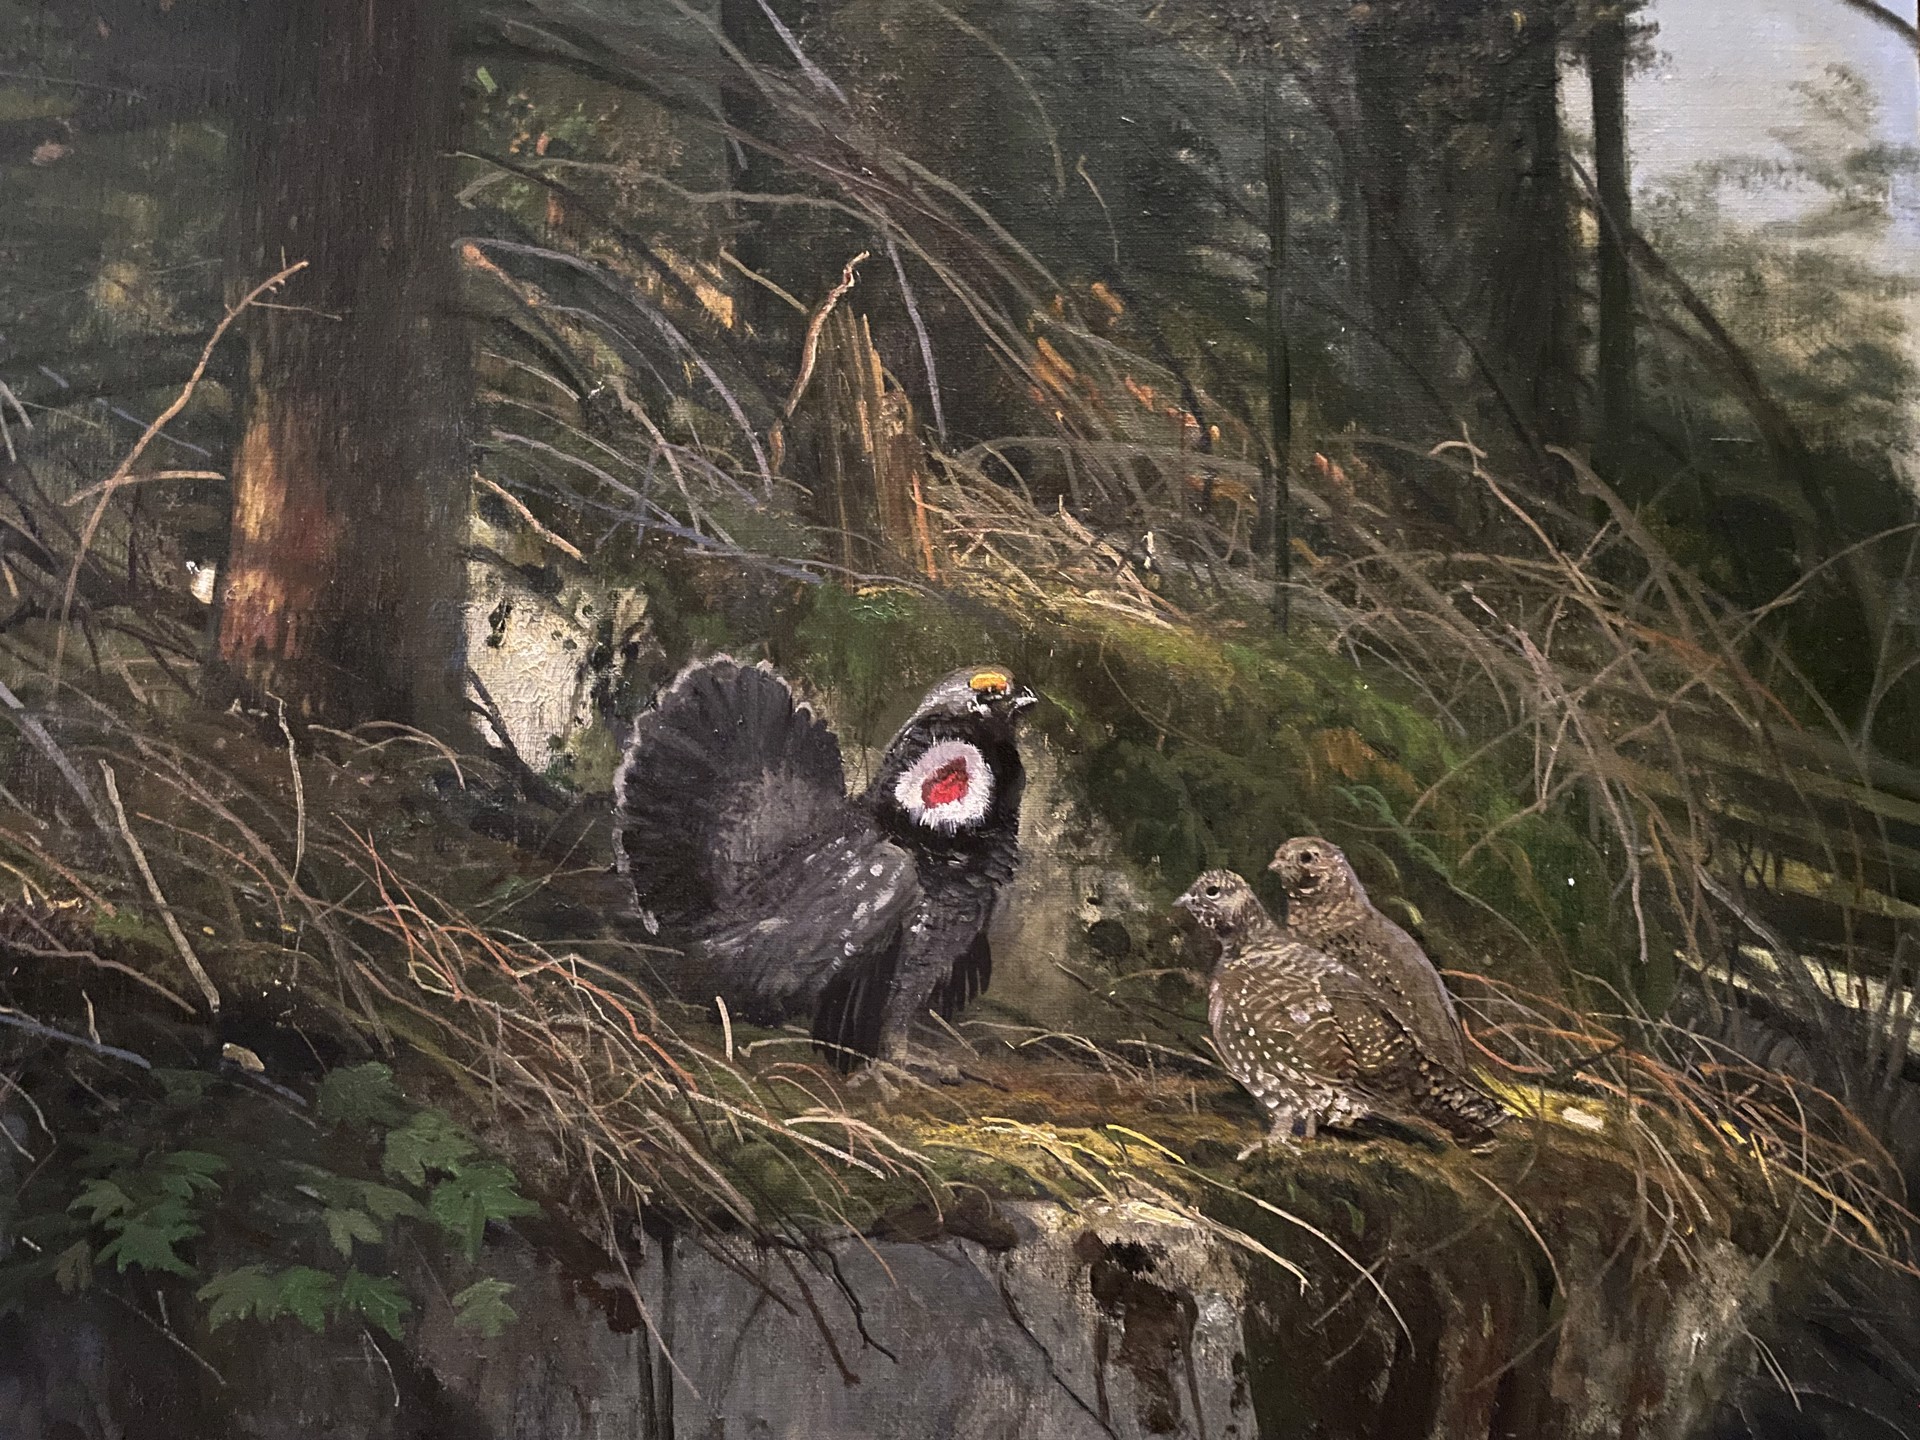 SPRUCE GROUSE by Michael Coleman